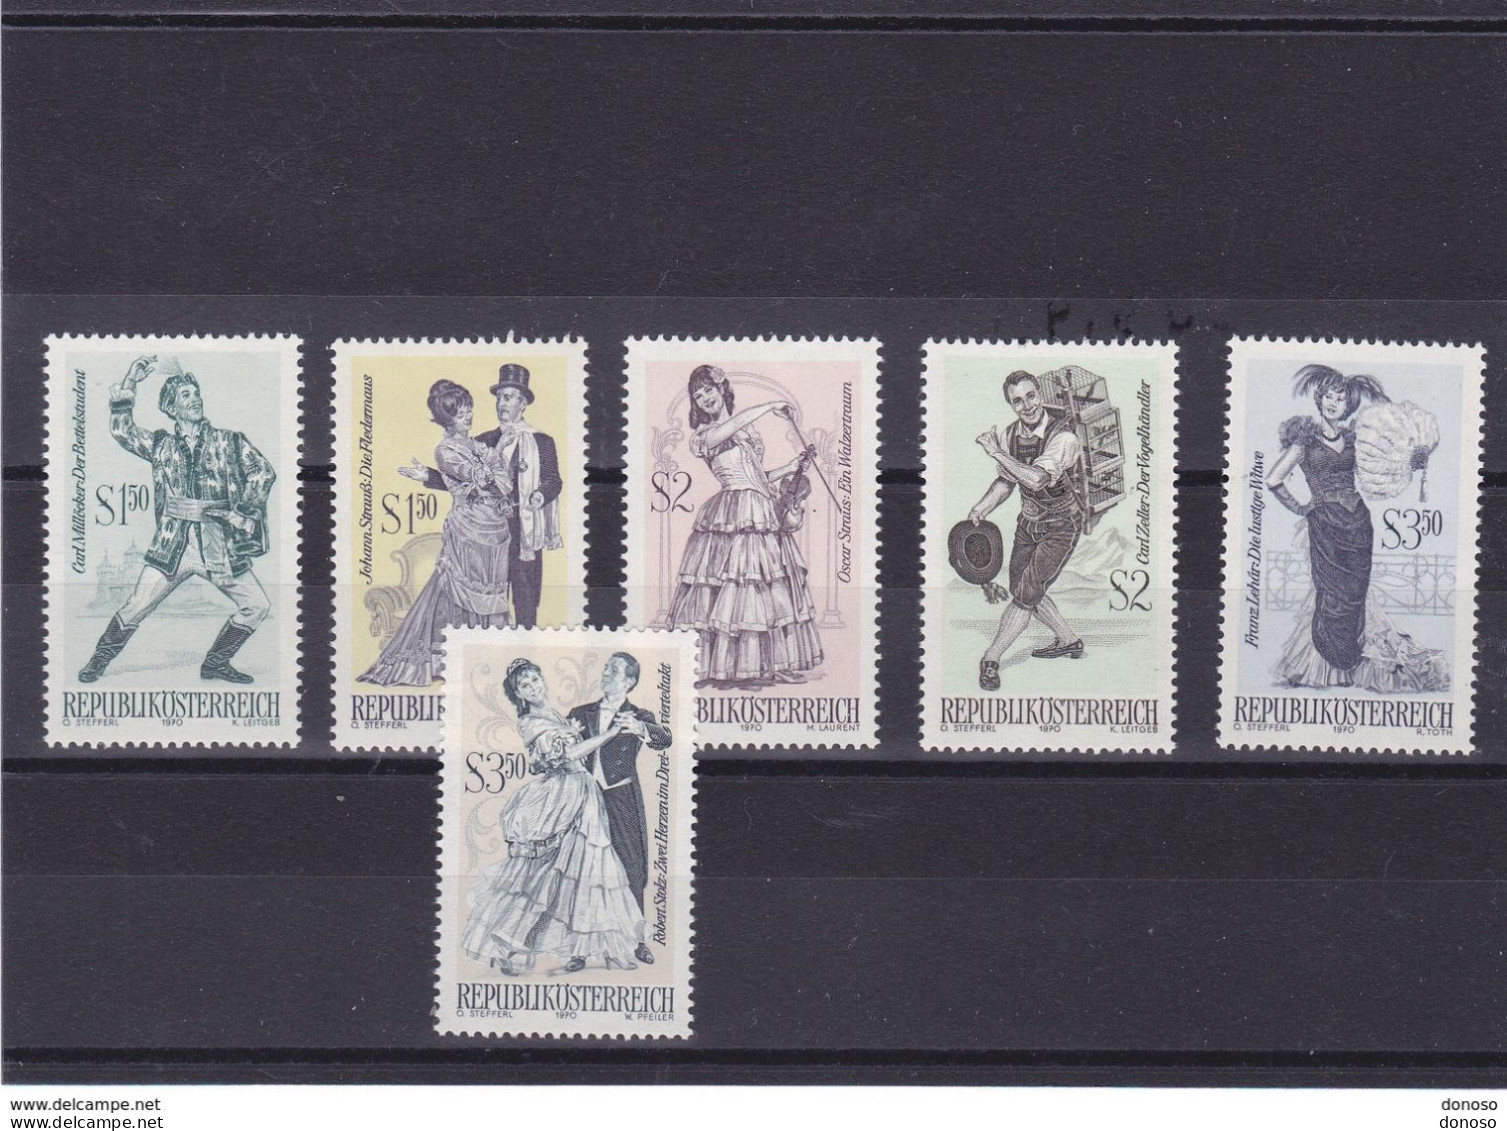 AUTRICHE 1970 OPERETTES Yvert 1160-1162 + 1167-1169, Michel 1331-1333 + 1338-1340 NEUF** MNH Cote 5 Euros - Unused Stamps